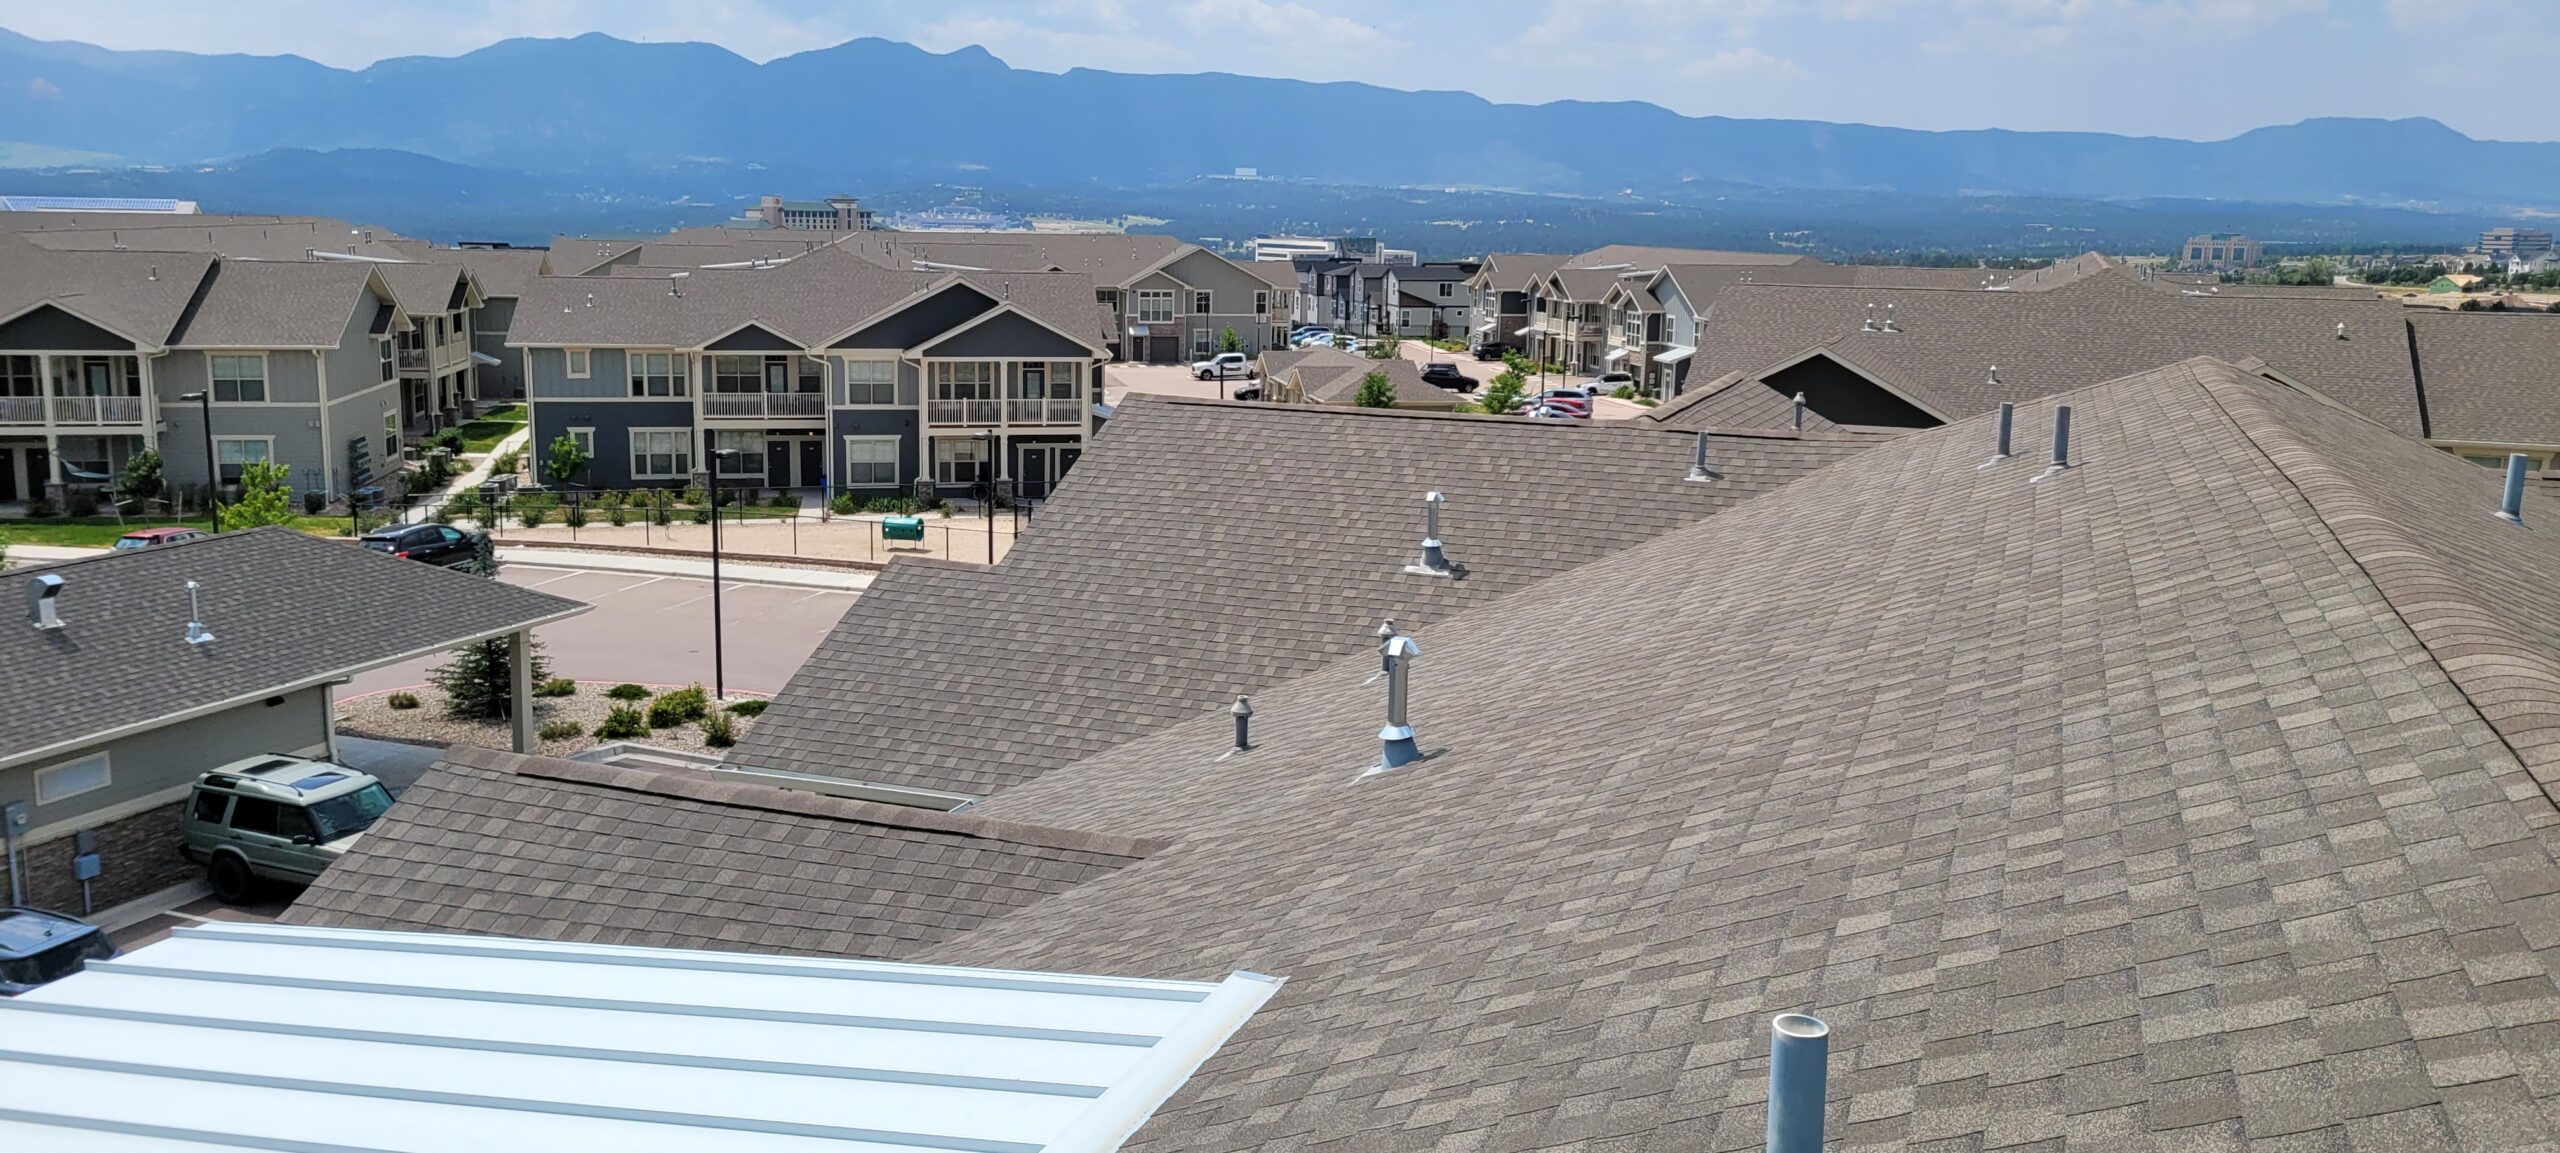 Multi-Family Roofing Repair Services in Colorado